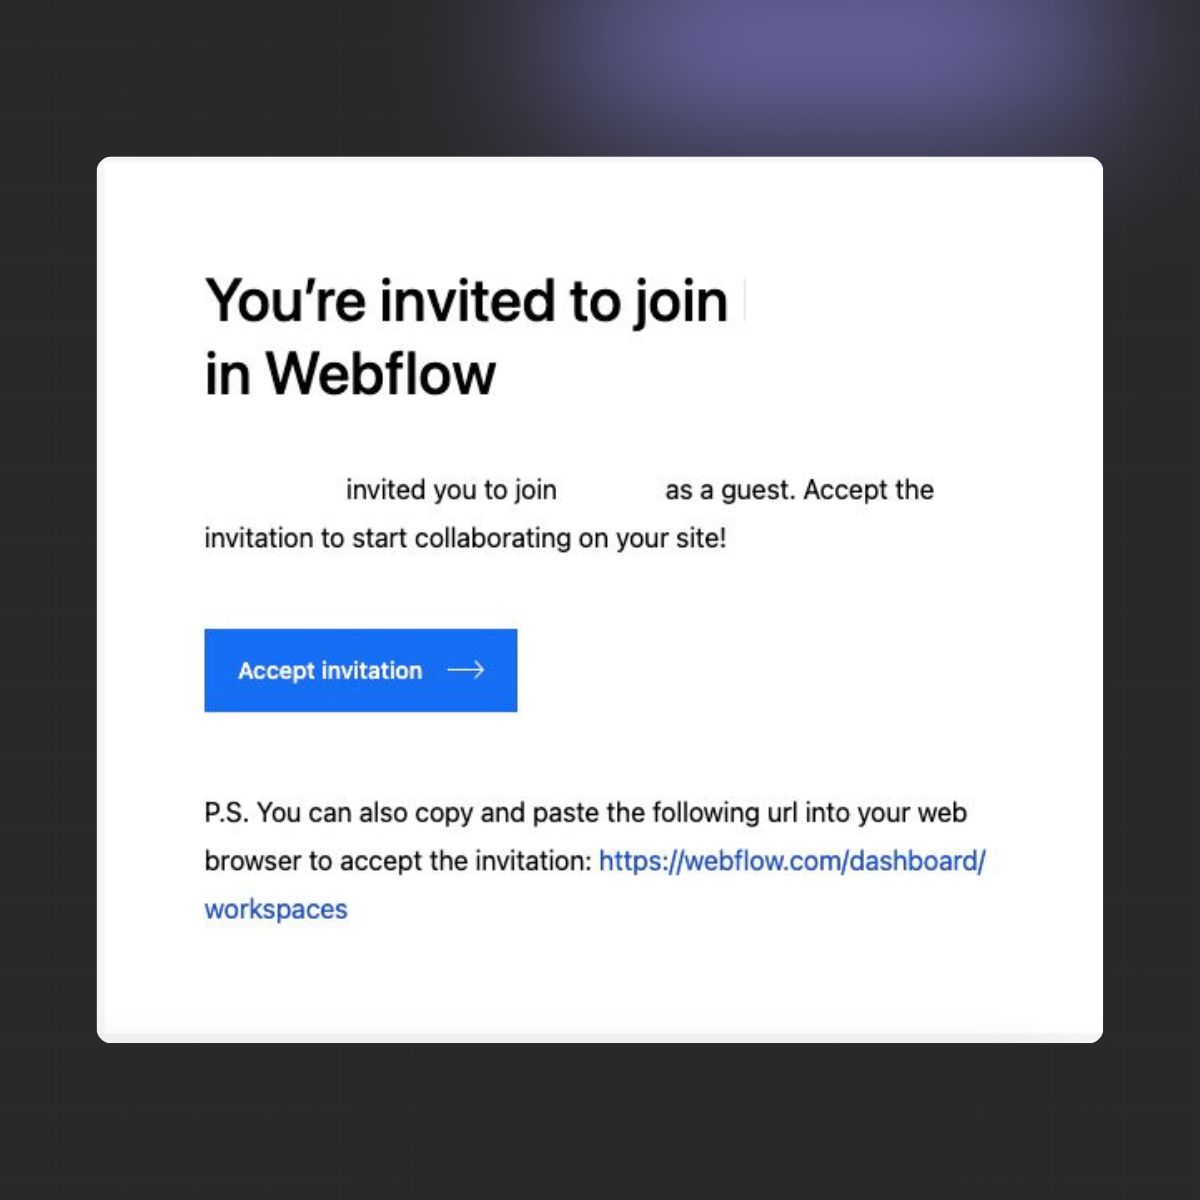 Always exciting to get invited to collaborate on a Webflow project! Its streamlined collaboration features, Webflow make it easy to work together and scale projects efficiently. As a #webflowexpert, I'm always eager to take on new projects and work with a talented team #webflow